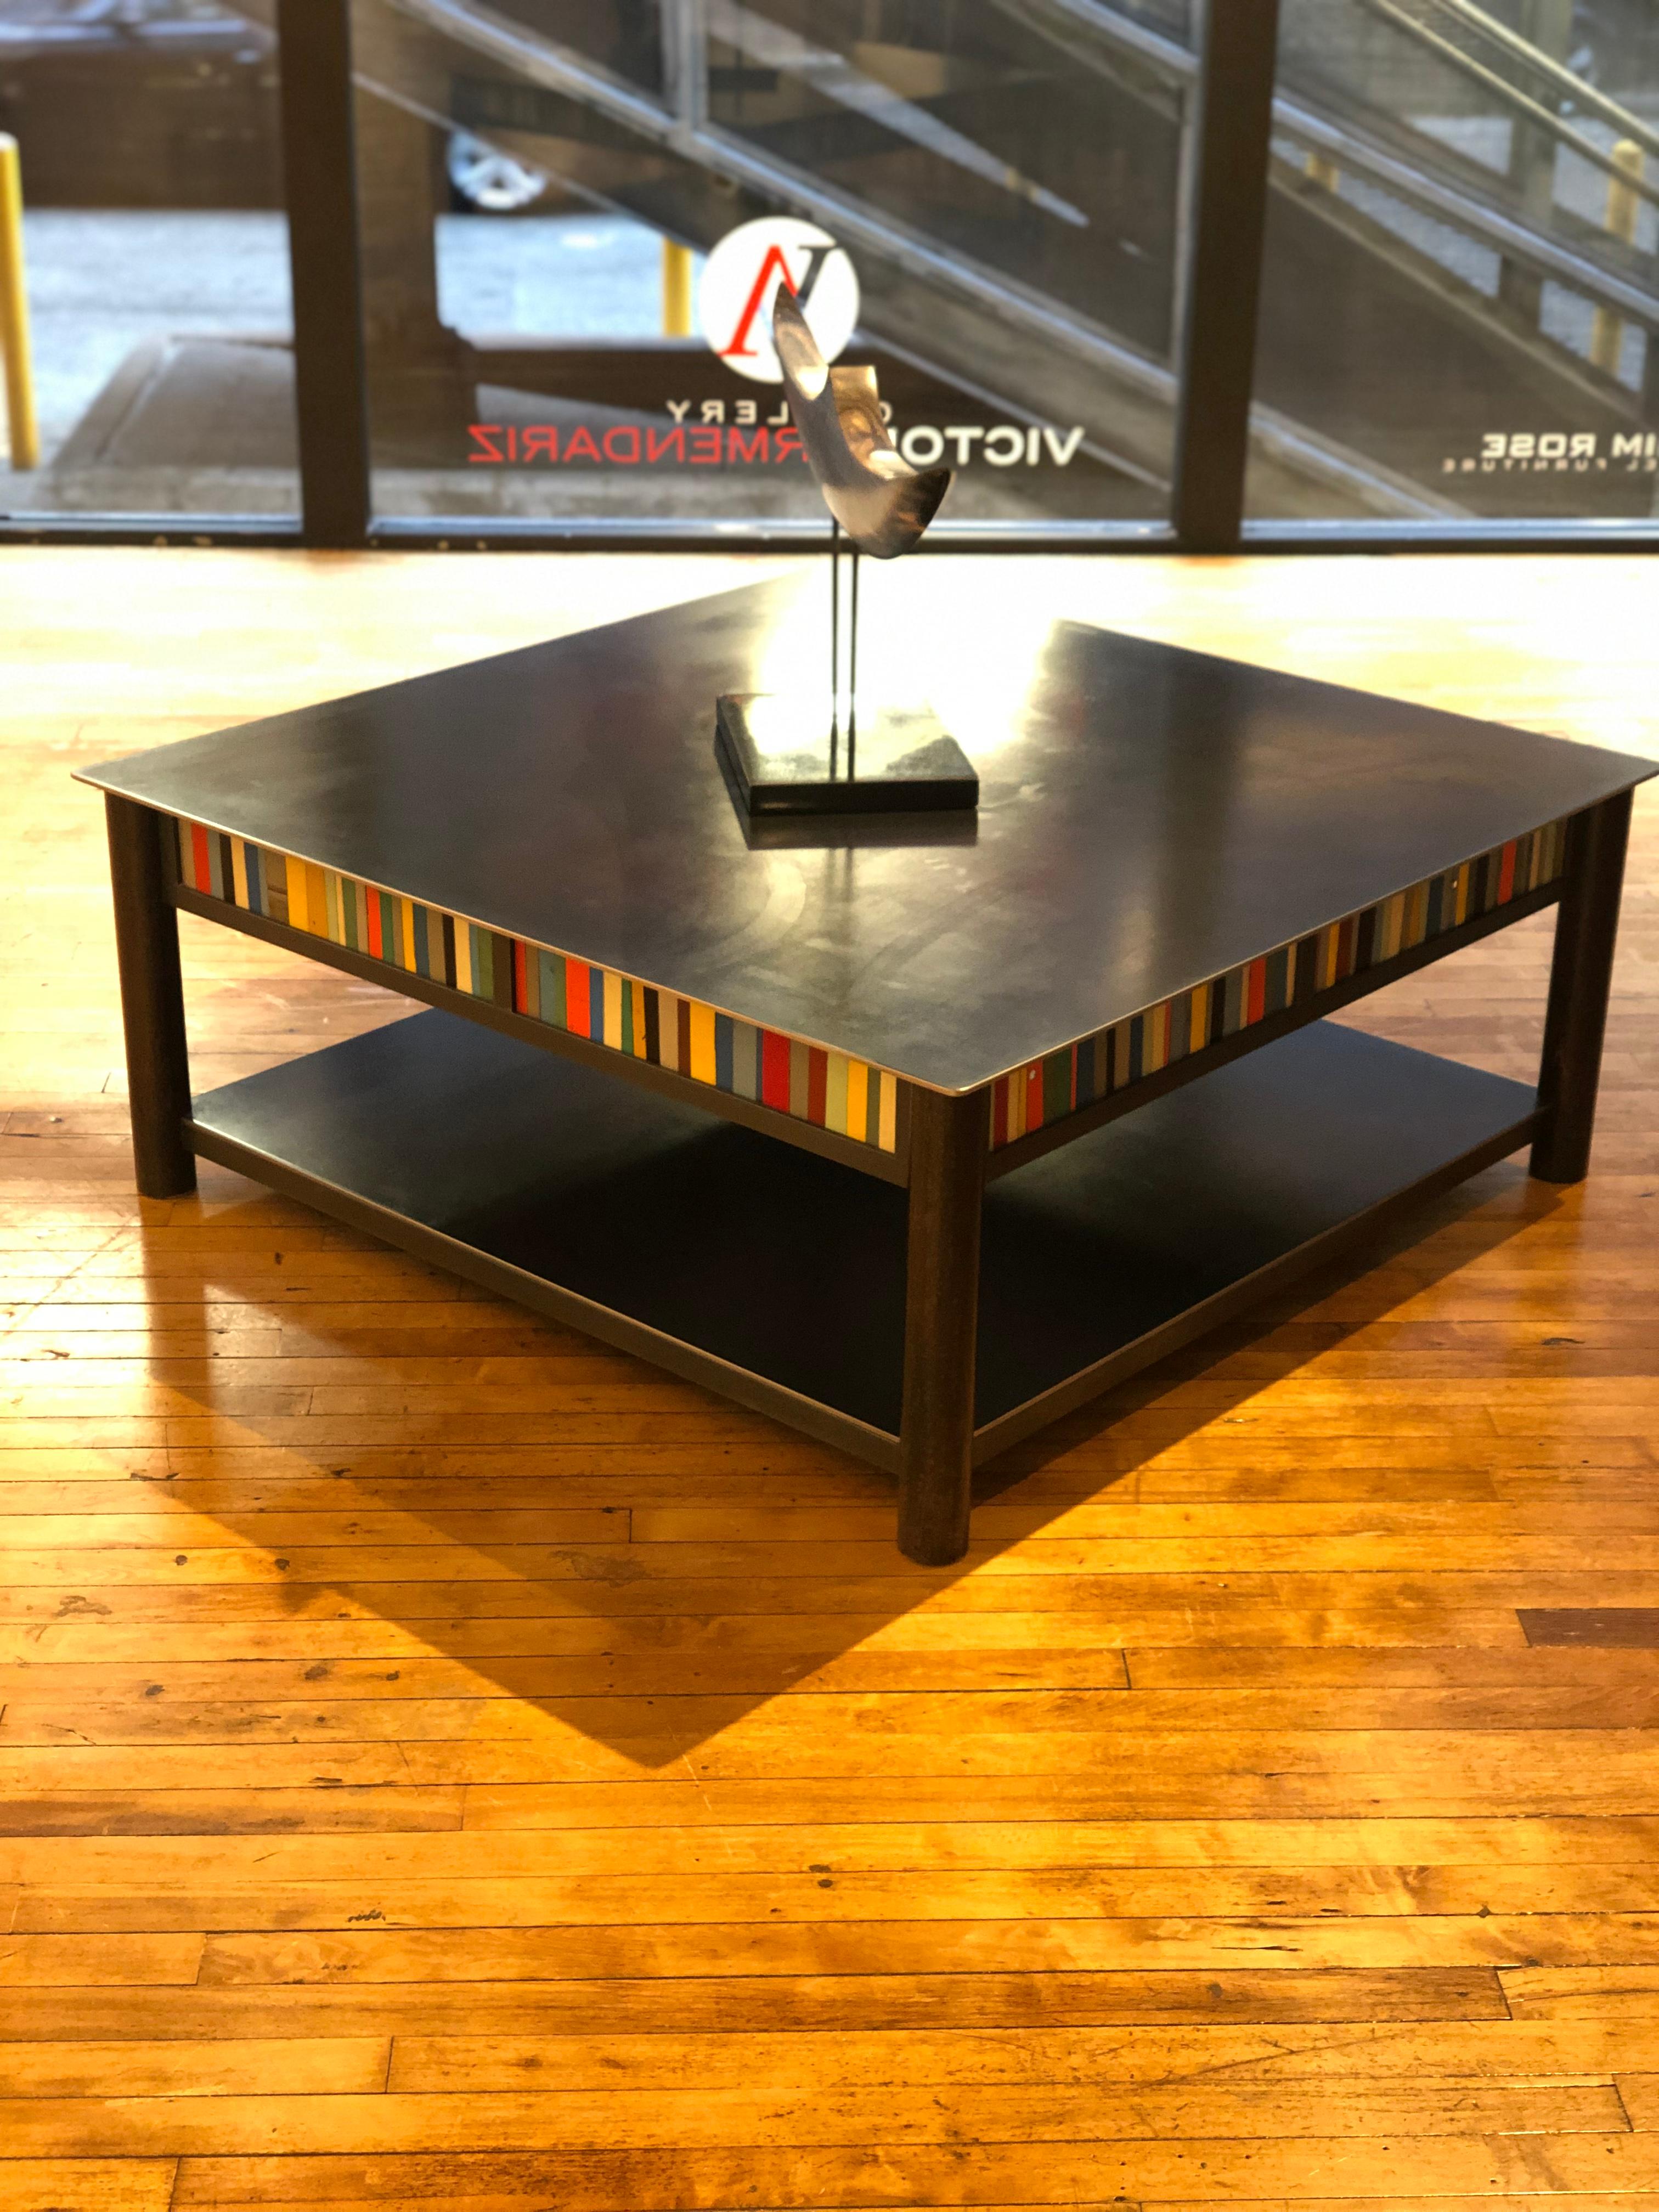 Welded Jim Rose Steel Furniture - Square Coffee Table with Shelf and Multi-Color Panels